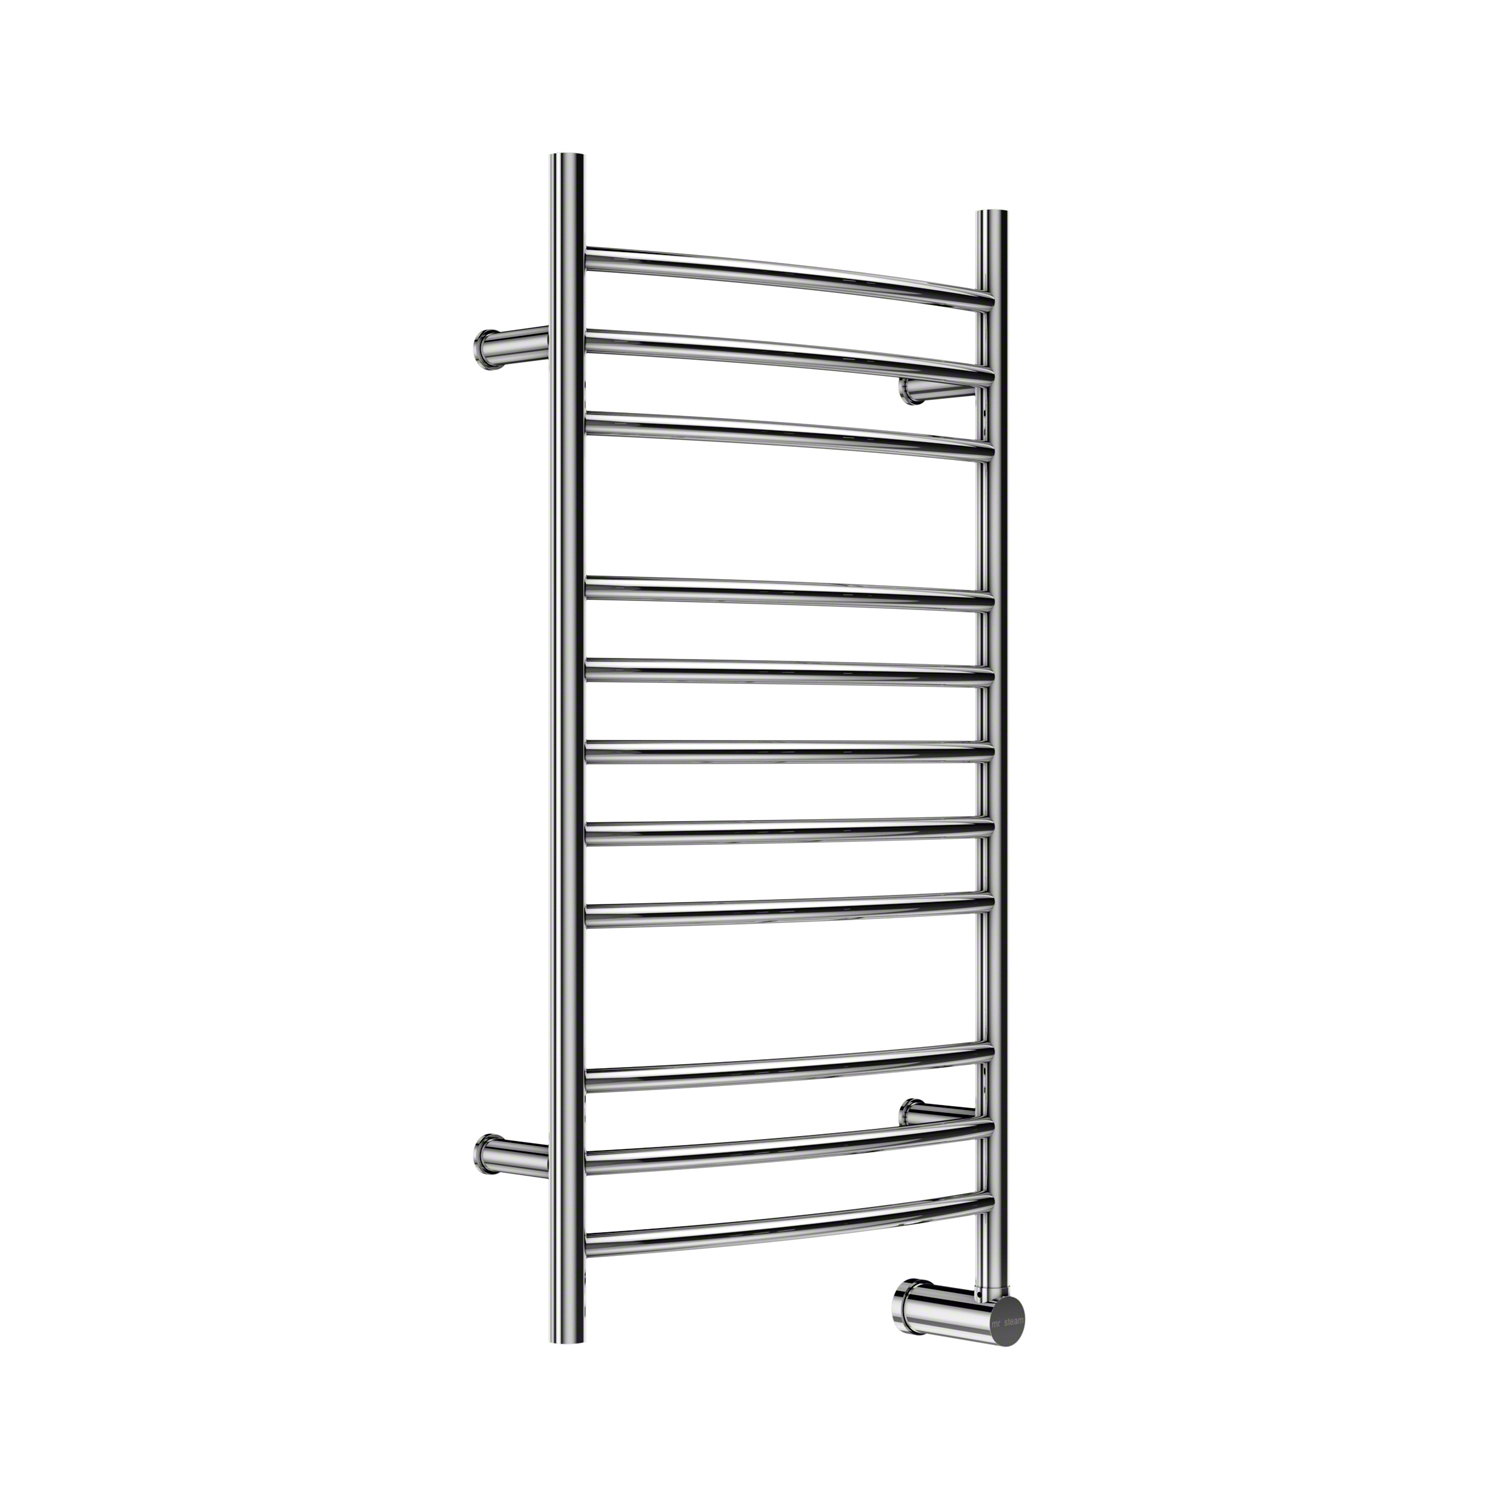 Mr Steam W336TSSP Metro Collection 11-Bar Wall-Mounted Electric Towel Warmer with Digital Timer in Stainless Steel Polished